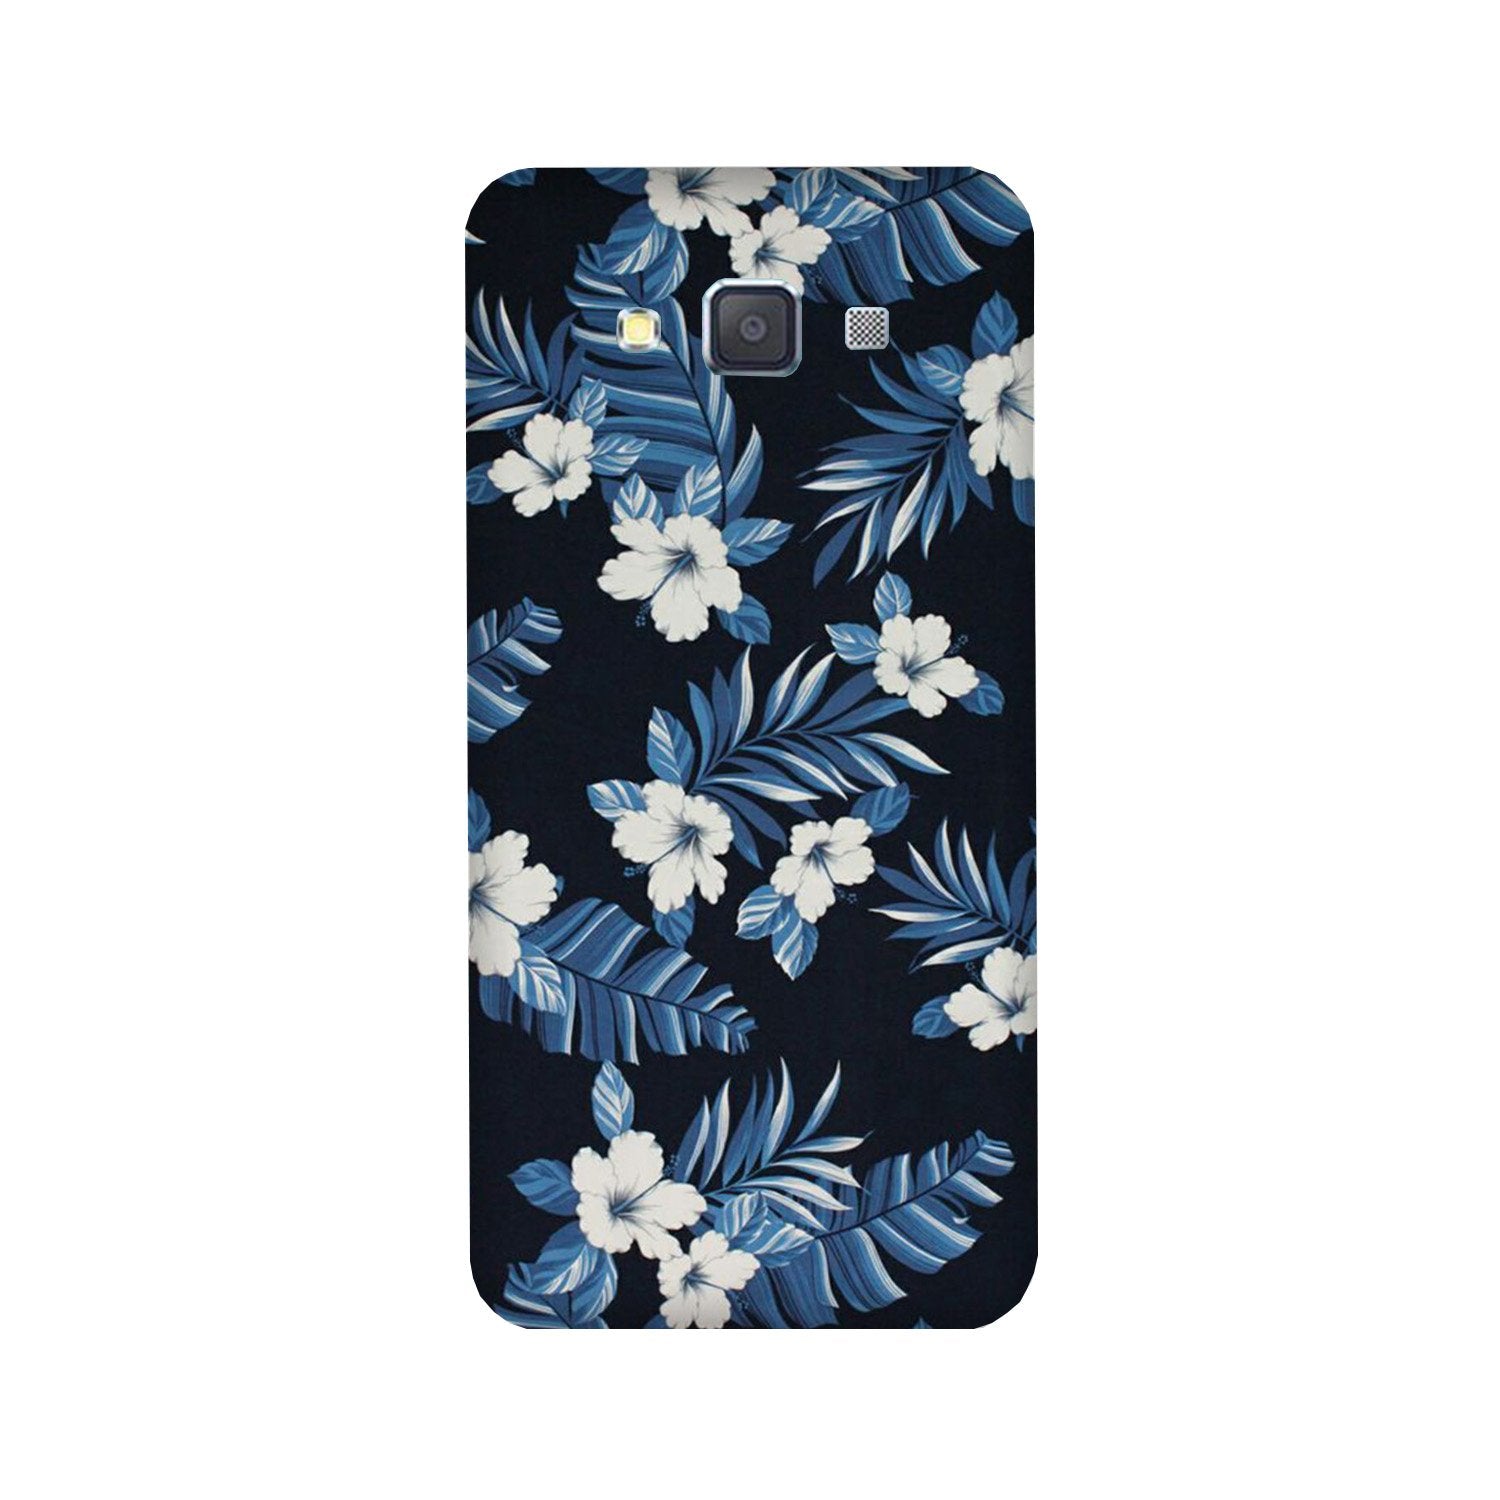 White flowers Blue Background2 Case for Galaxy J7 (2016)